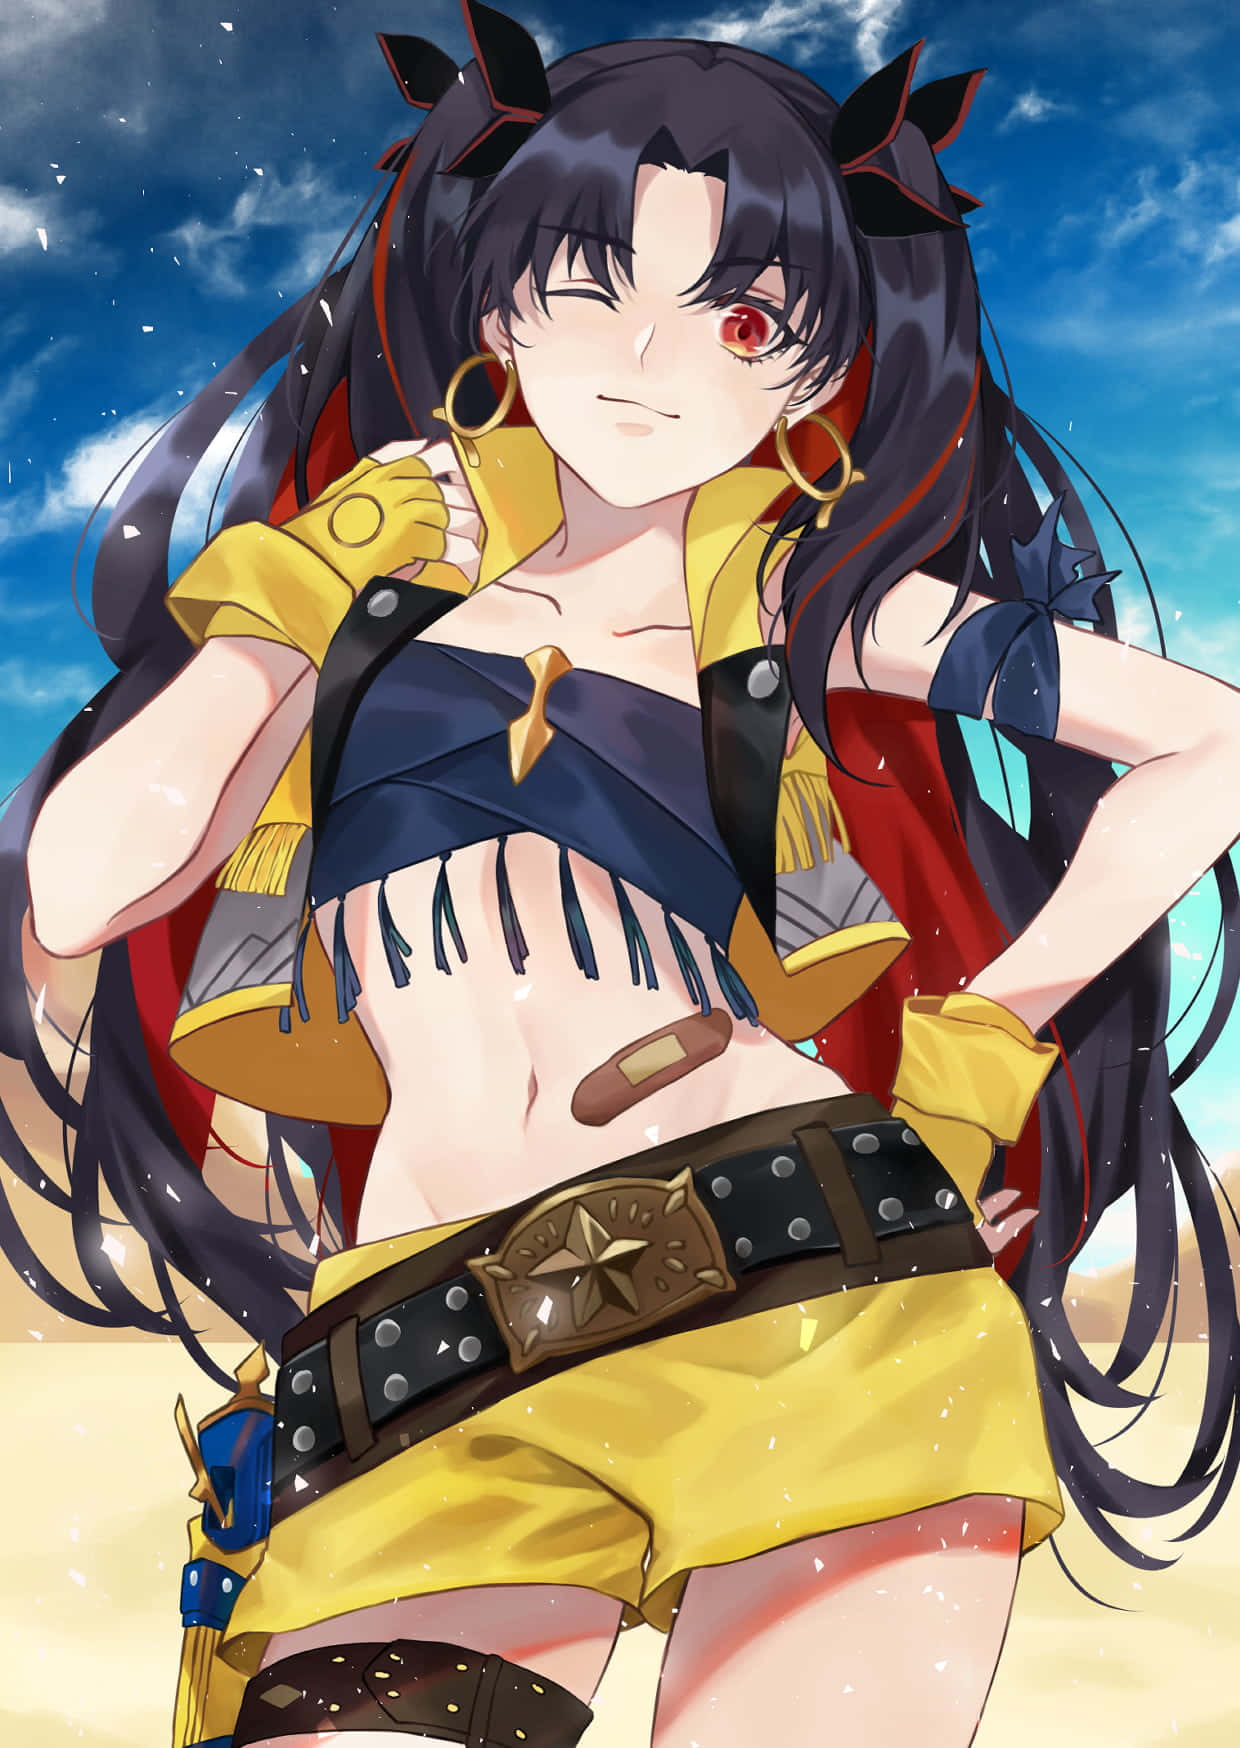 Ishtar From Fate Grand Order In Stunning Action Pose Wallpaper